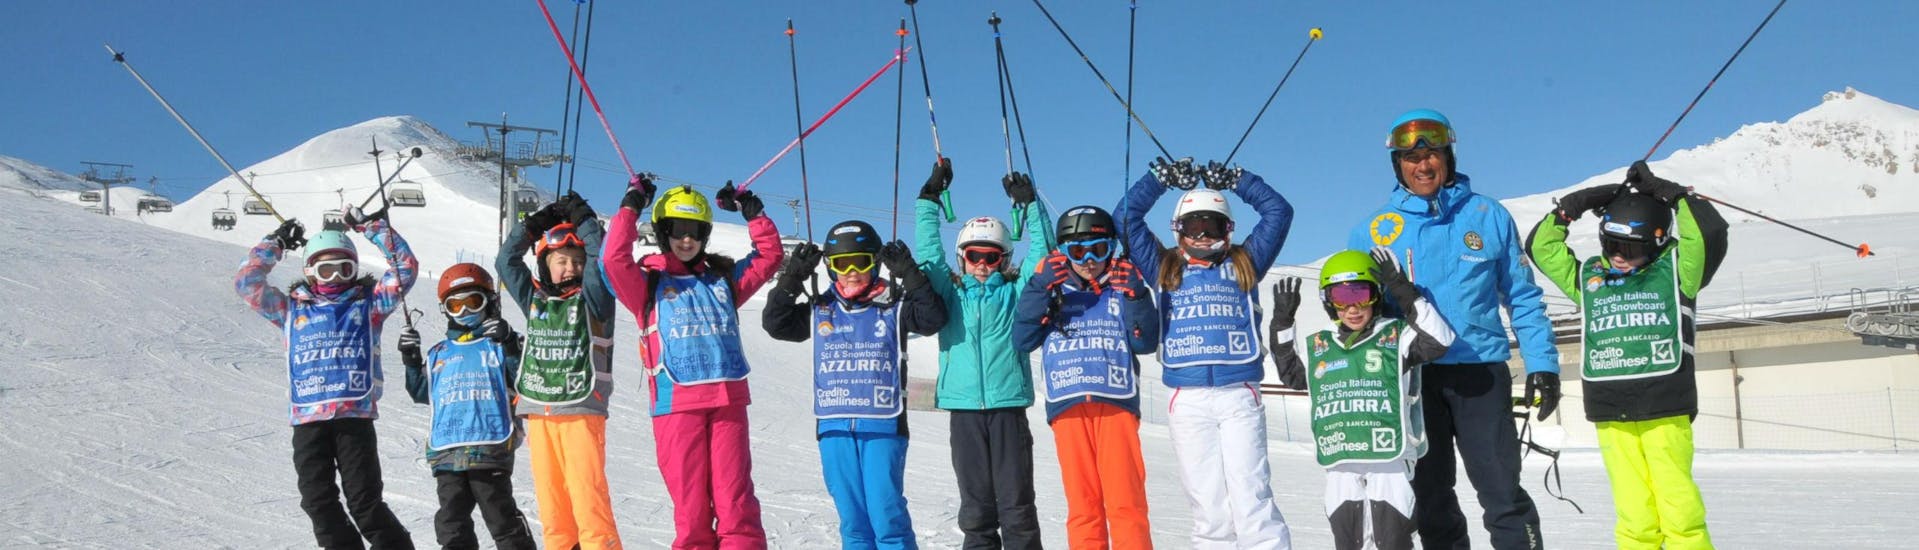 A group of children is enjoying their Kids Ski Lessons (5-12 y.) - Half Day - With Experience with the ski school Scuola di Sci Azzurra Livigno on the ski slopes of Livigno.